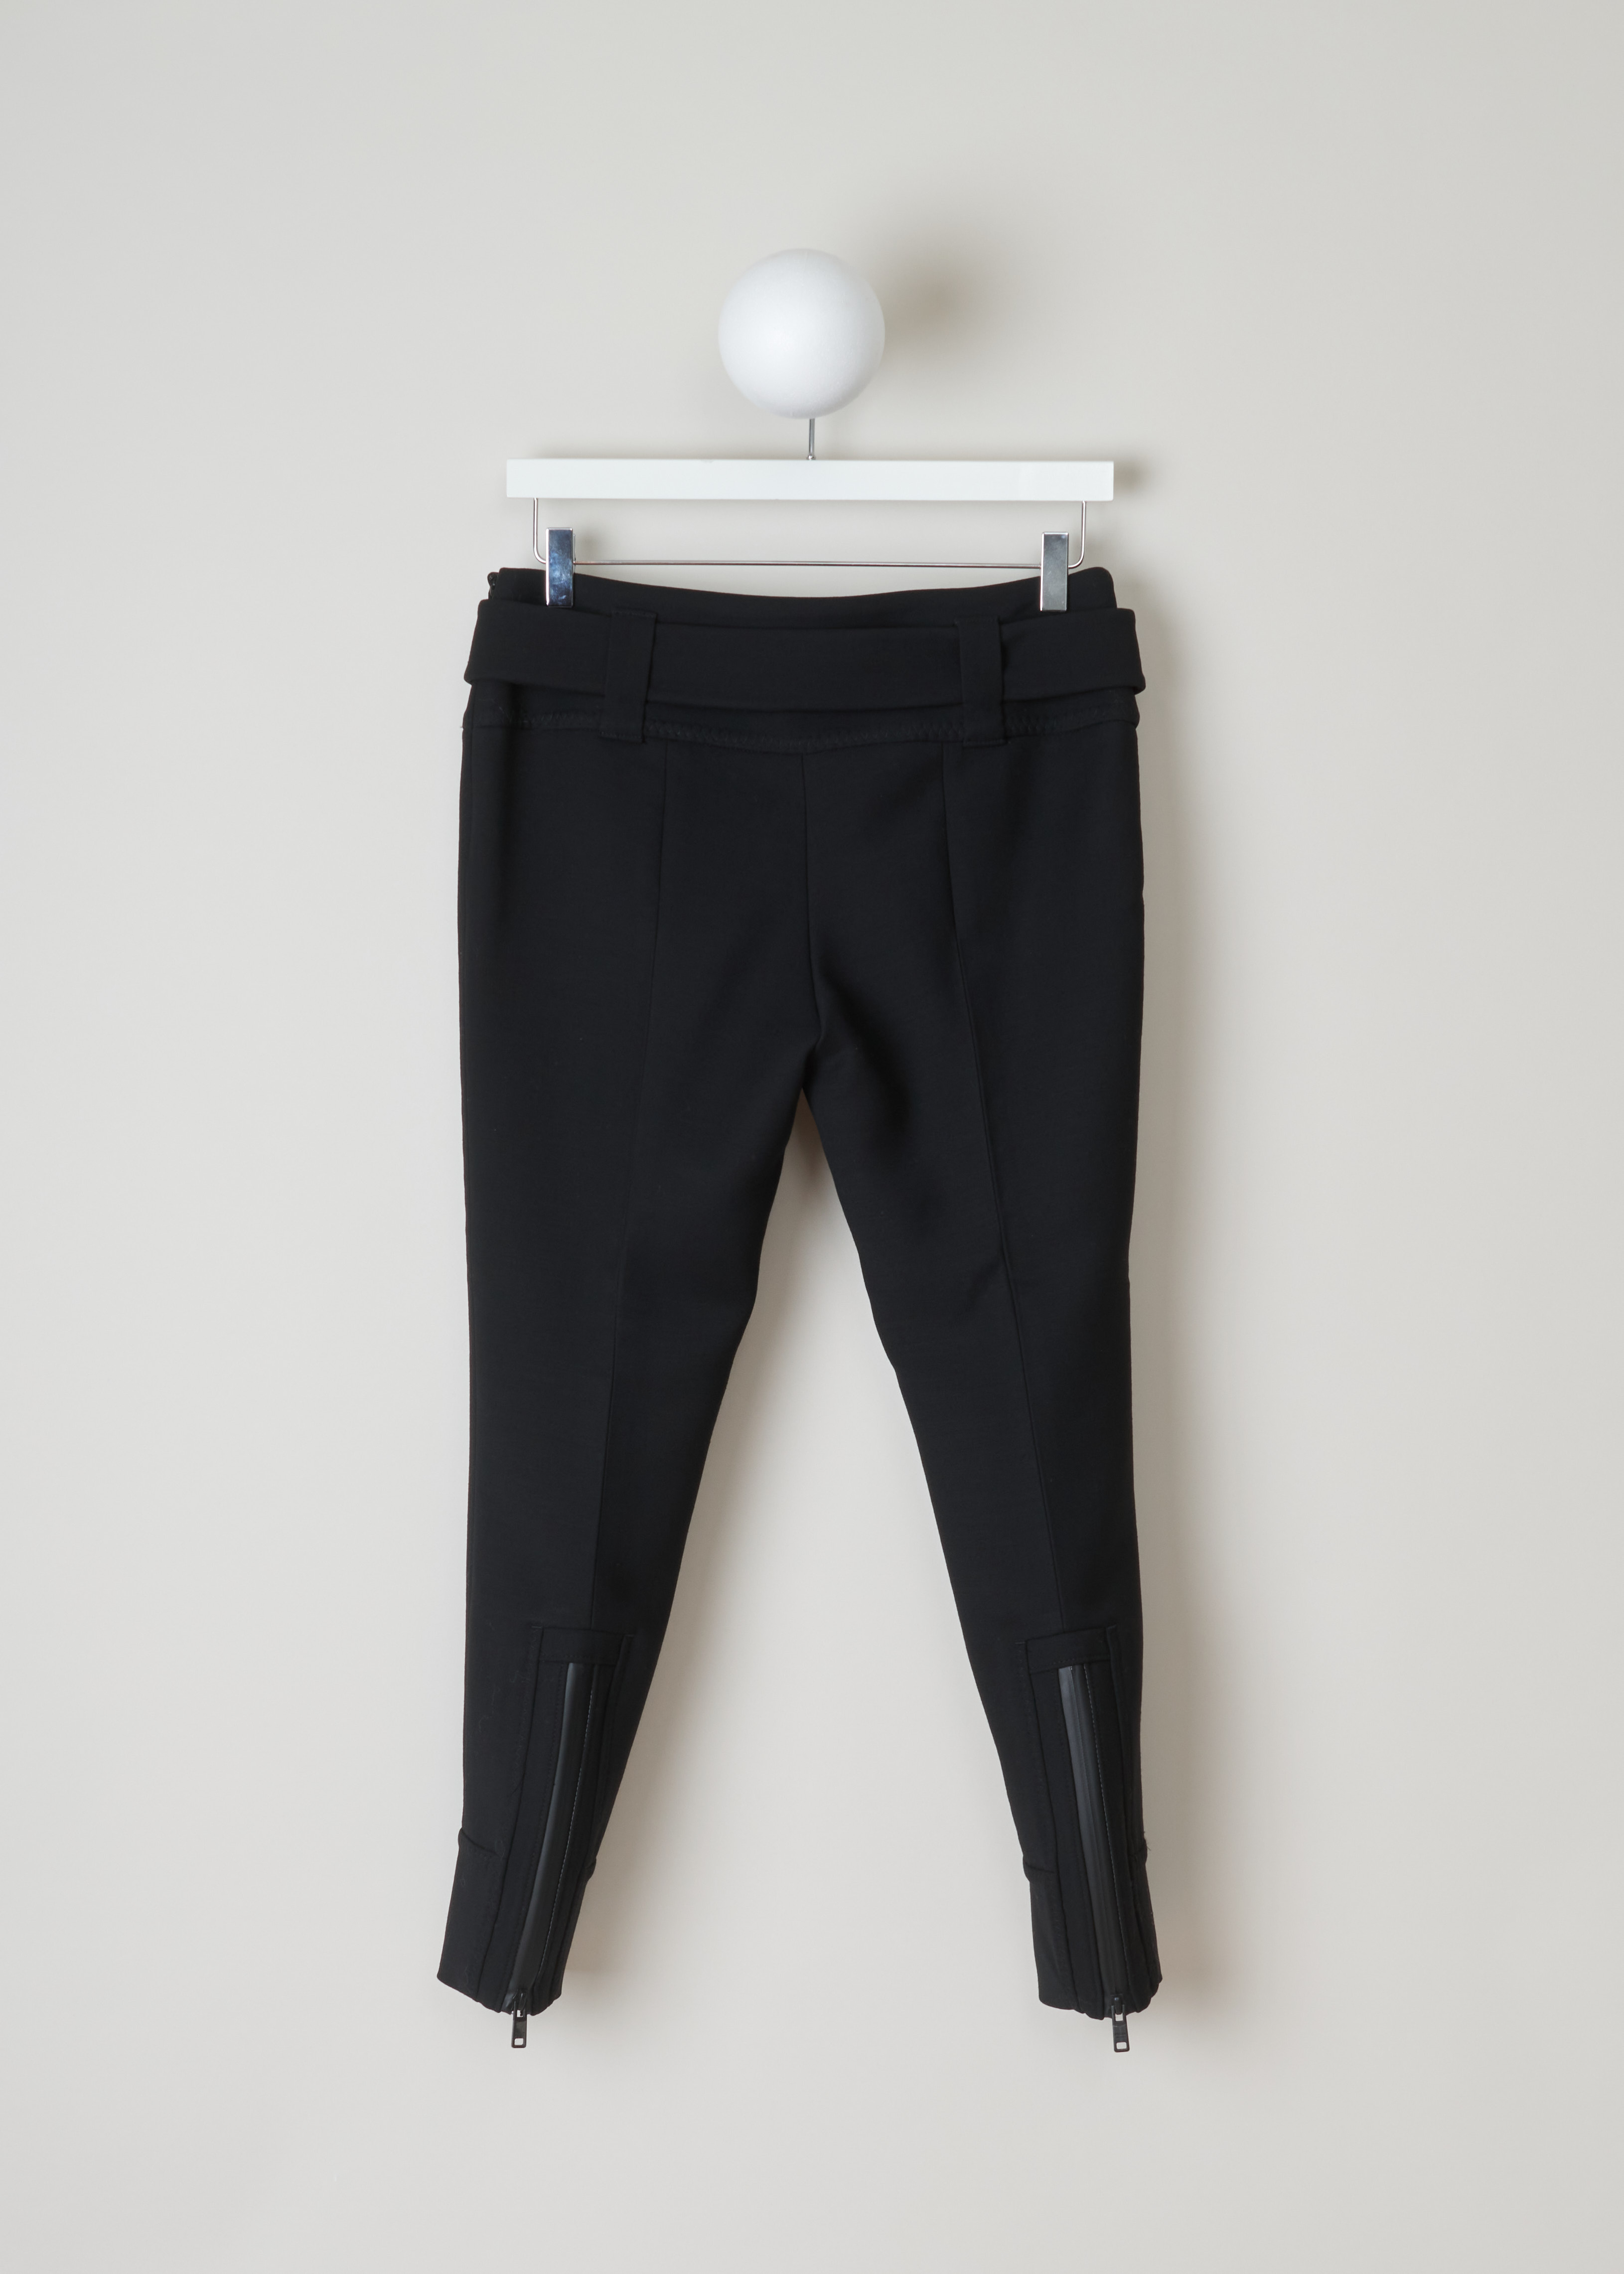 Prada Black belted trousers Natte_Double_Im_P271BH_F0002_Nero back. Fitted black trousers with a wide waistband with belt loops and a detachable belt in the same fabric, an invisible zipper fastening on the side, centre creases and cuffed hems.